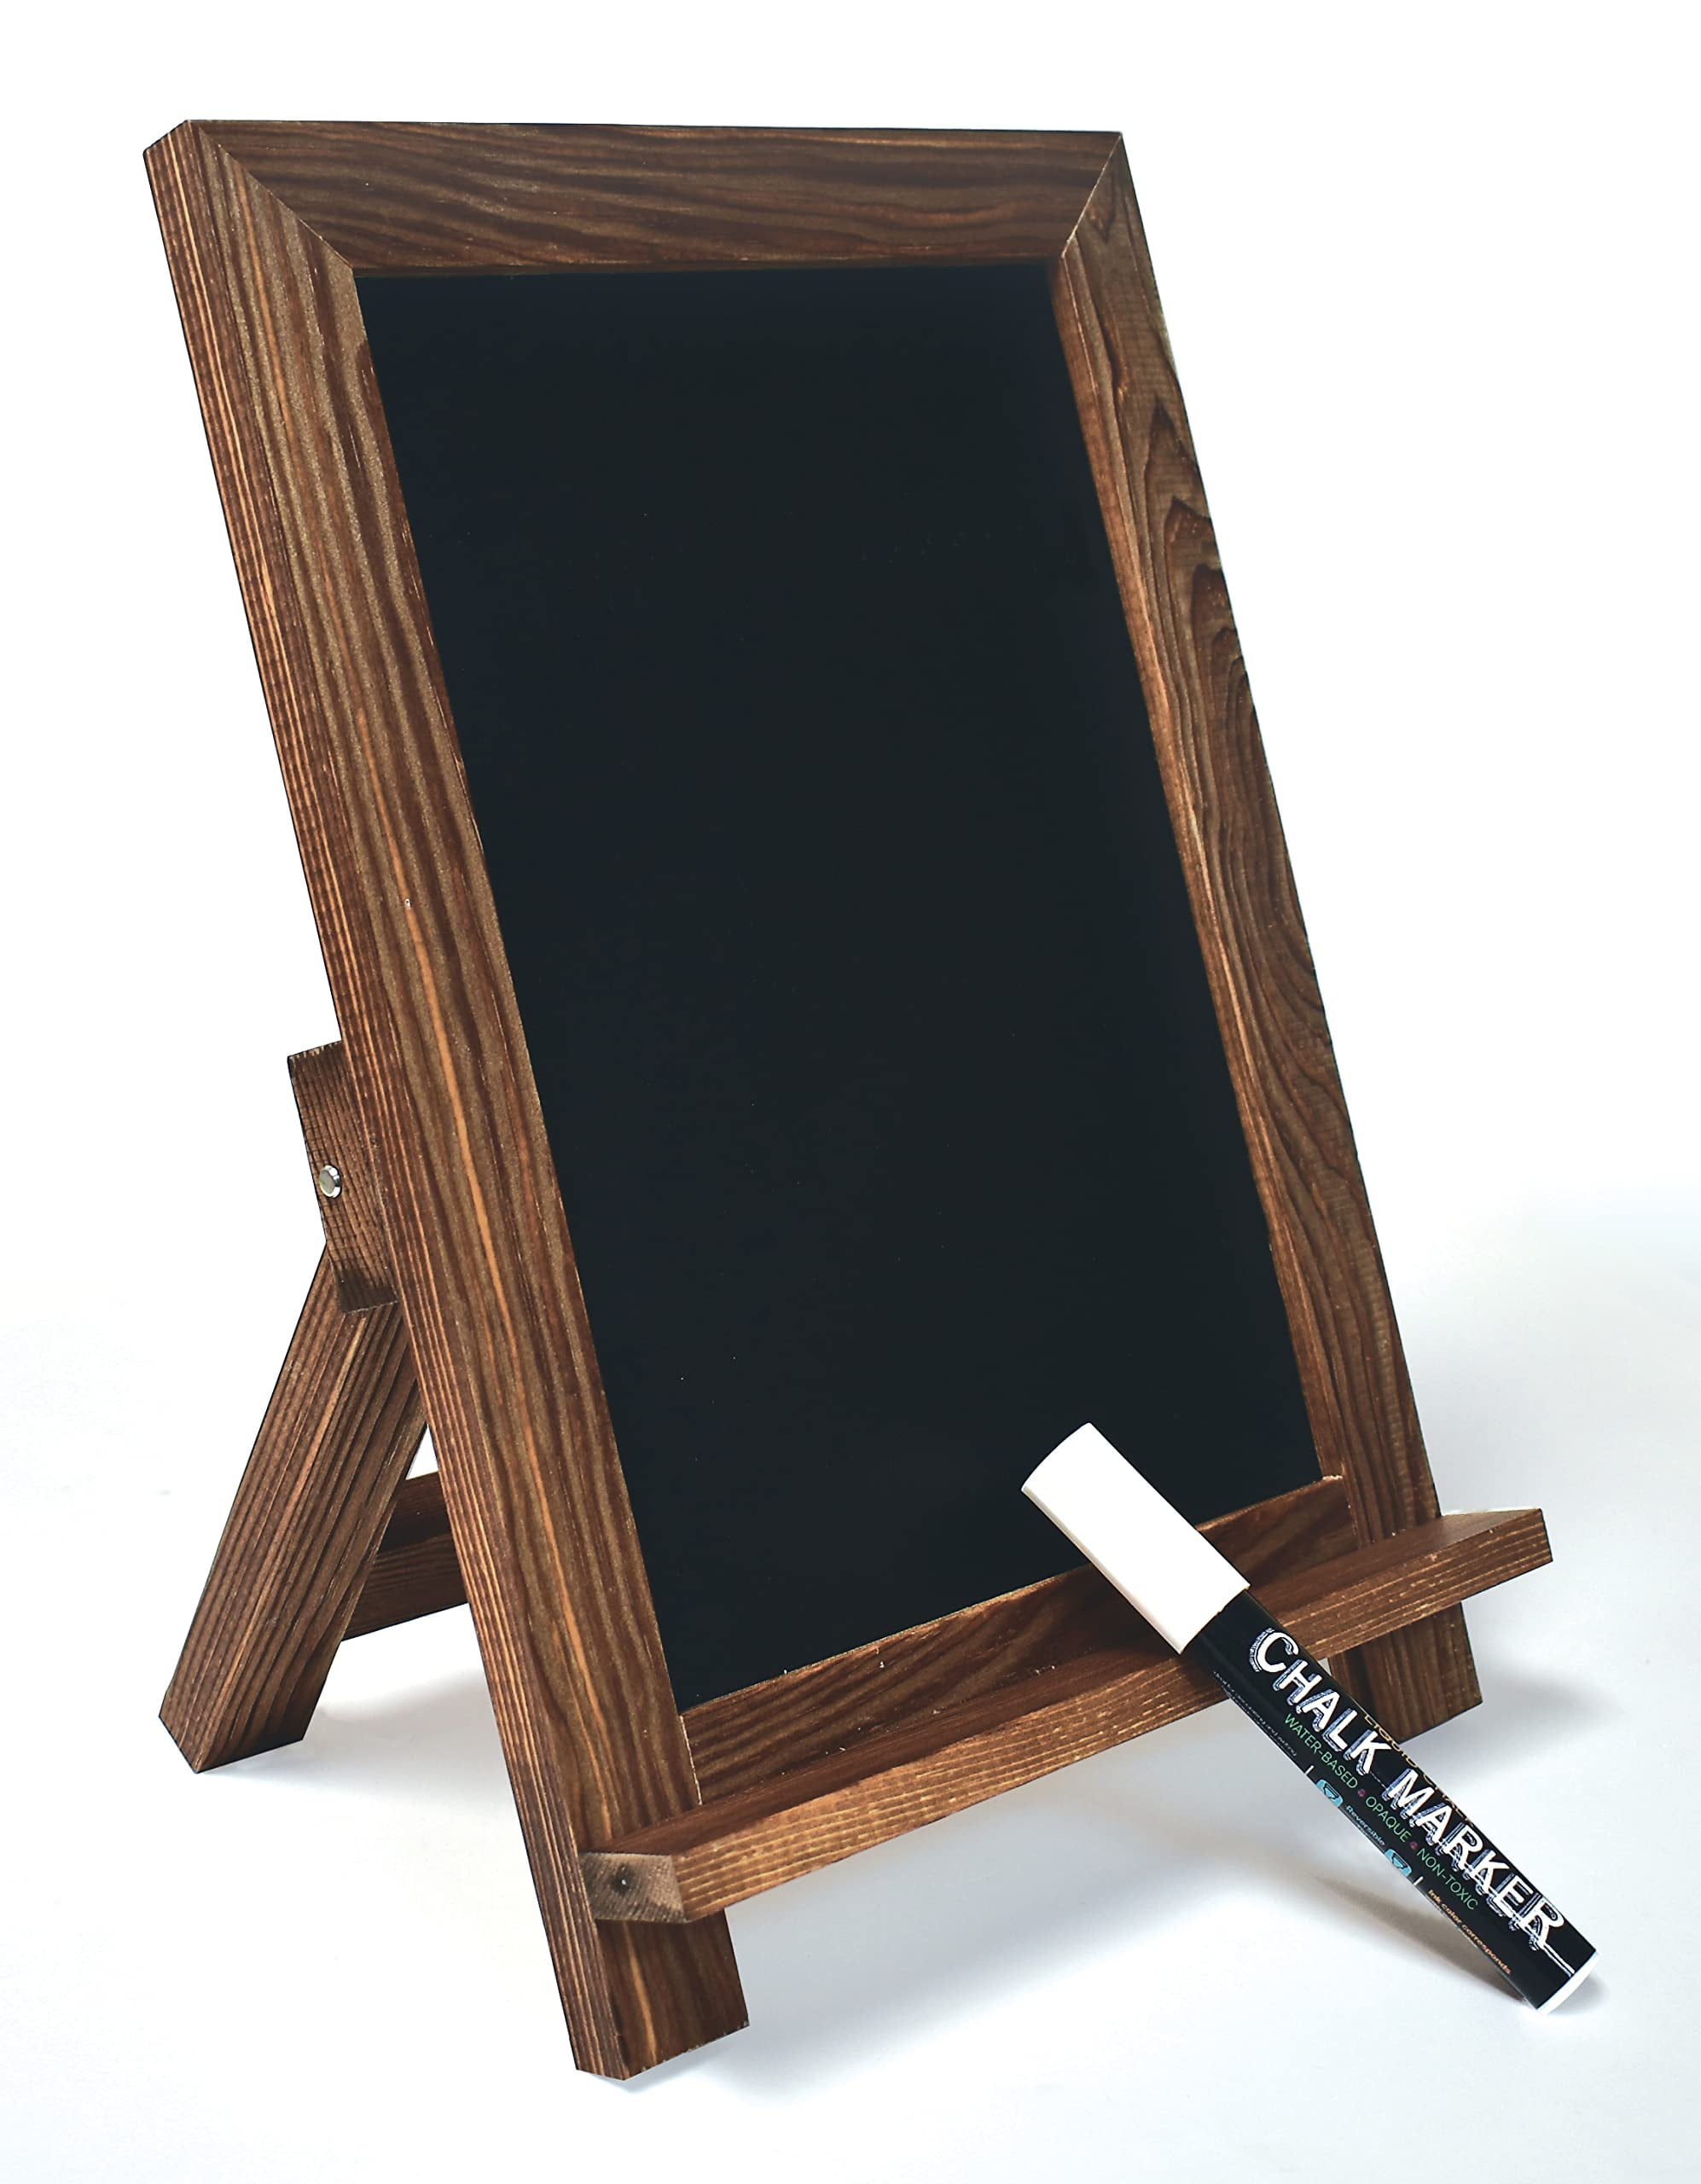 Framed Tabletop Chalkboard Sign, 9.5 x 14, Rustic Wood Frame, Small  Magnetic Chalkboard, Built-in Ledge and Folding Stand, One White Chalk  Marker